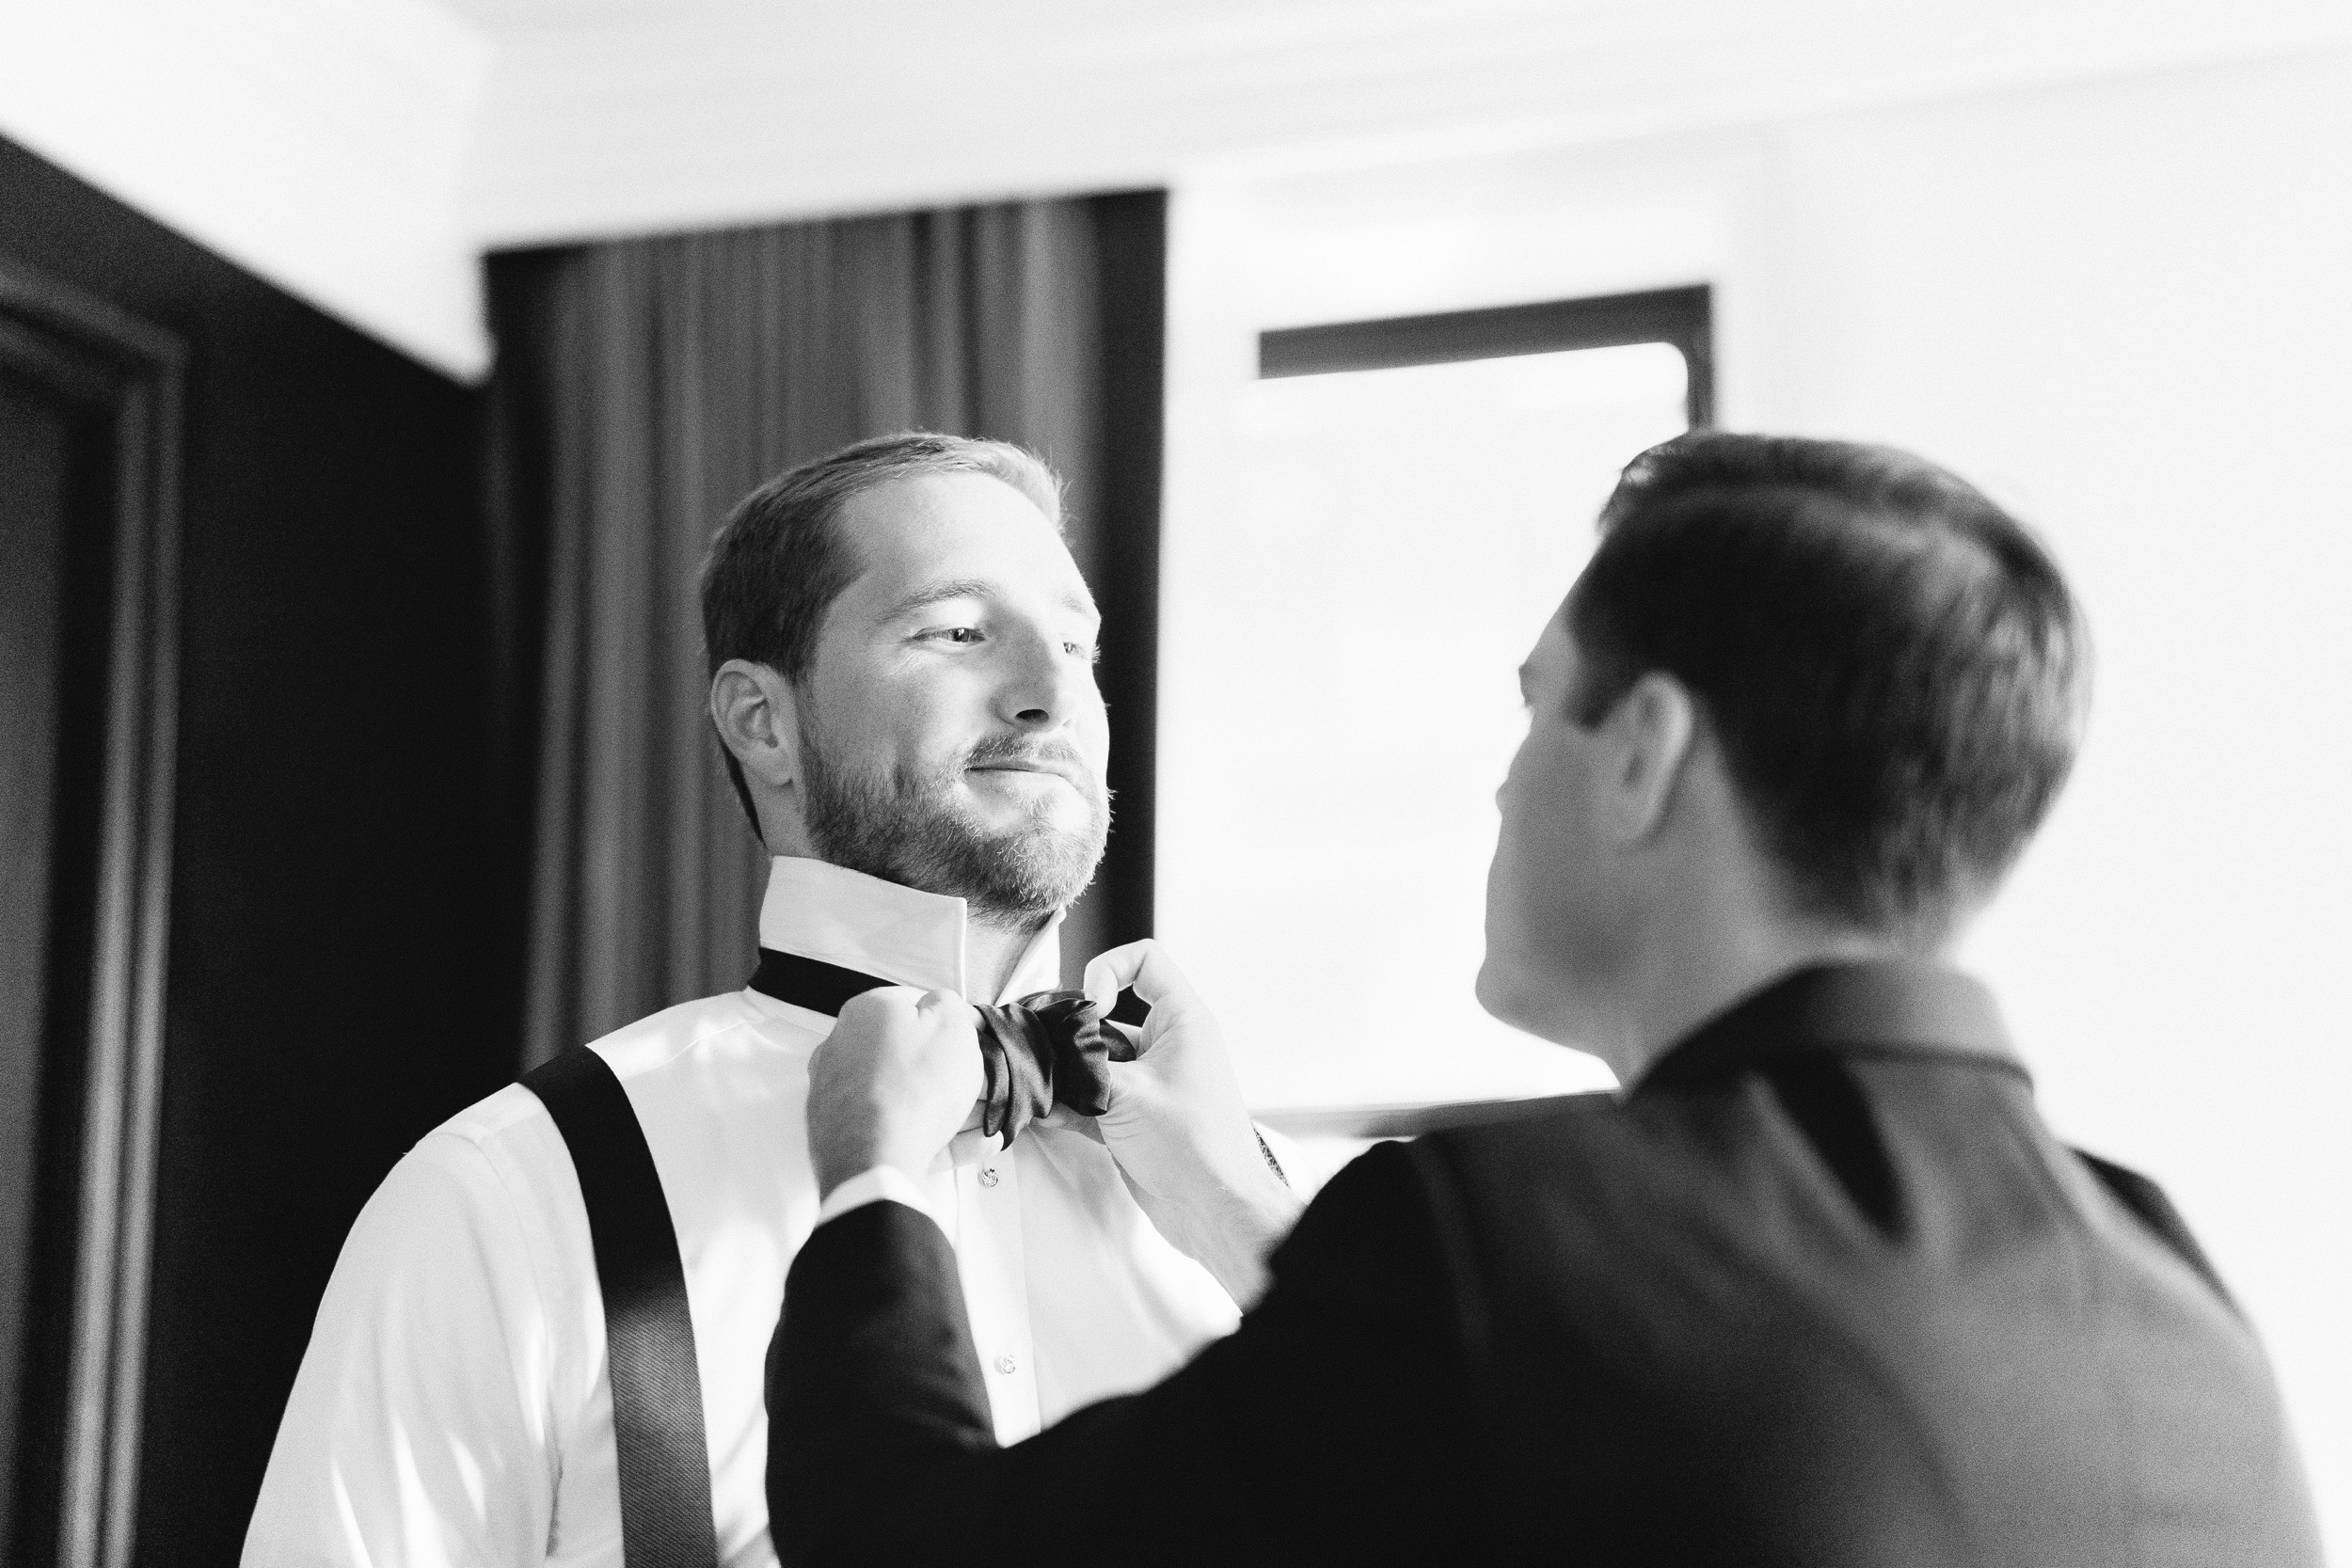 Boston groom getting ready at Beacon XV hotel for wedding in black and white